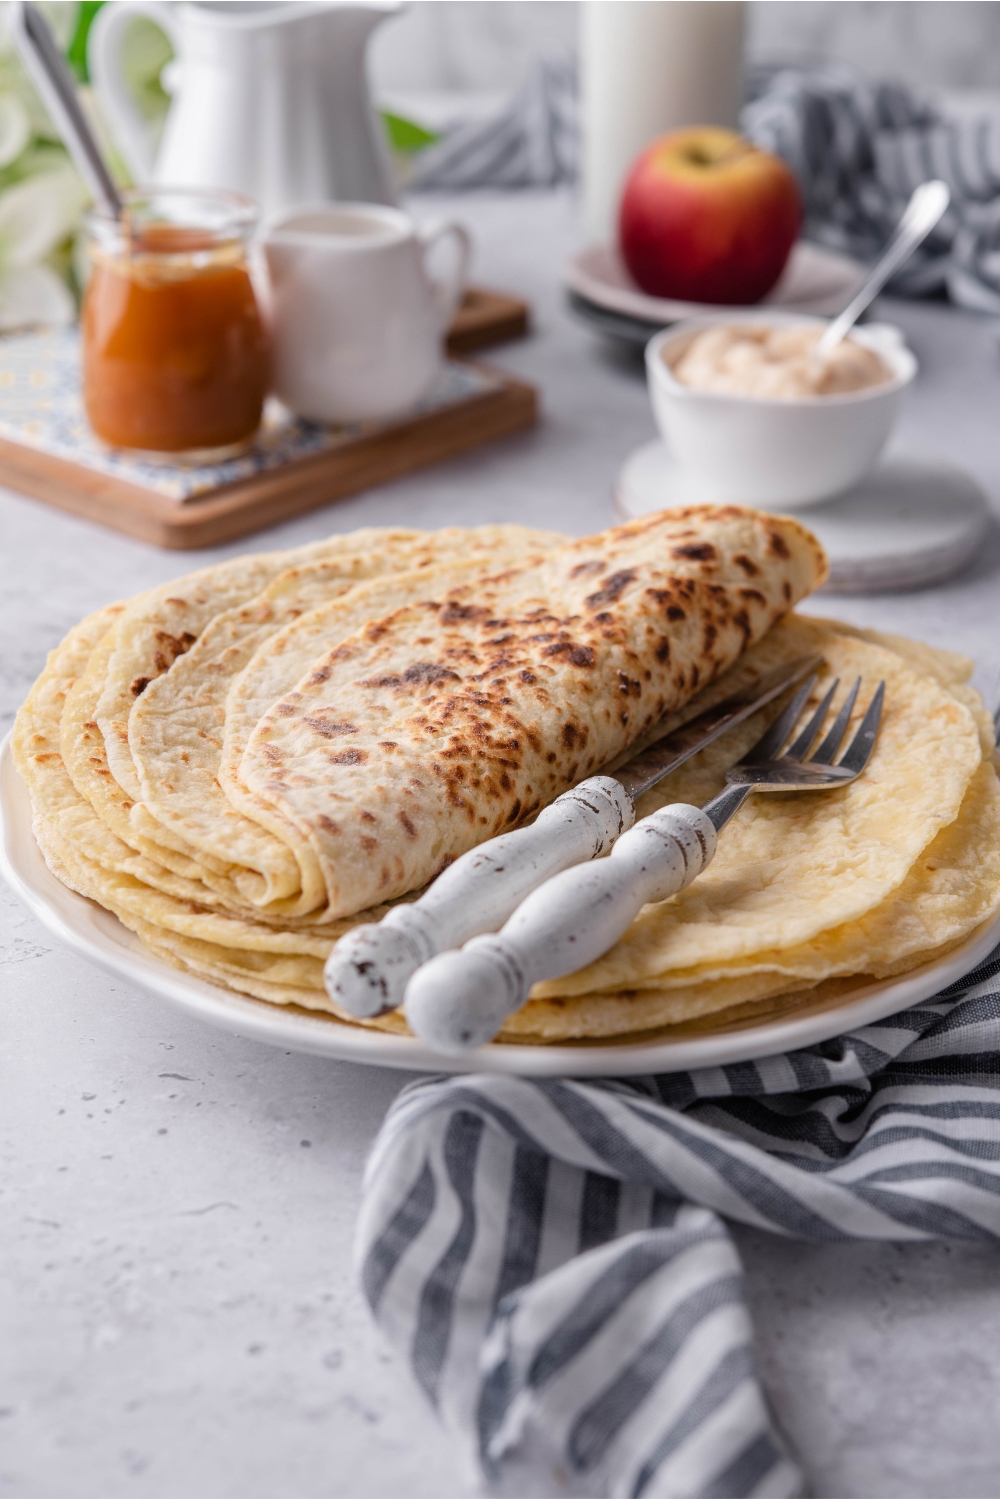 A stack of lefse flatbread with half of the stack folded on top of itself and a fork and knife on the stack of lefse. In the background is an assortment of fillings and toppings for the lefse.